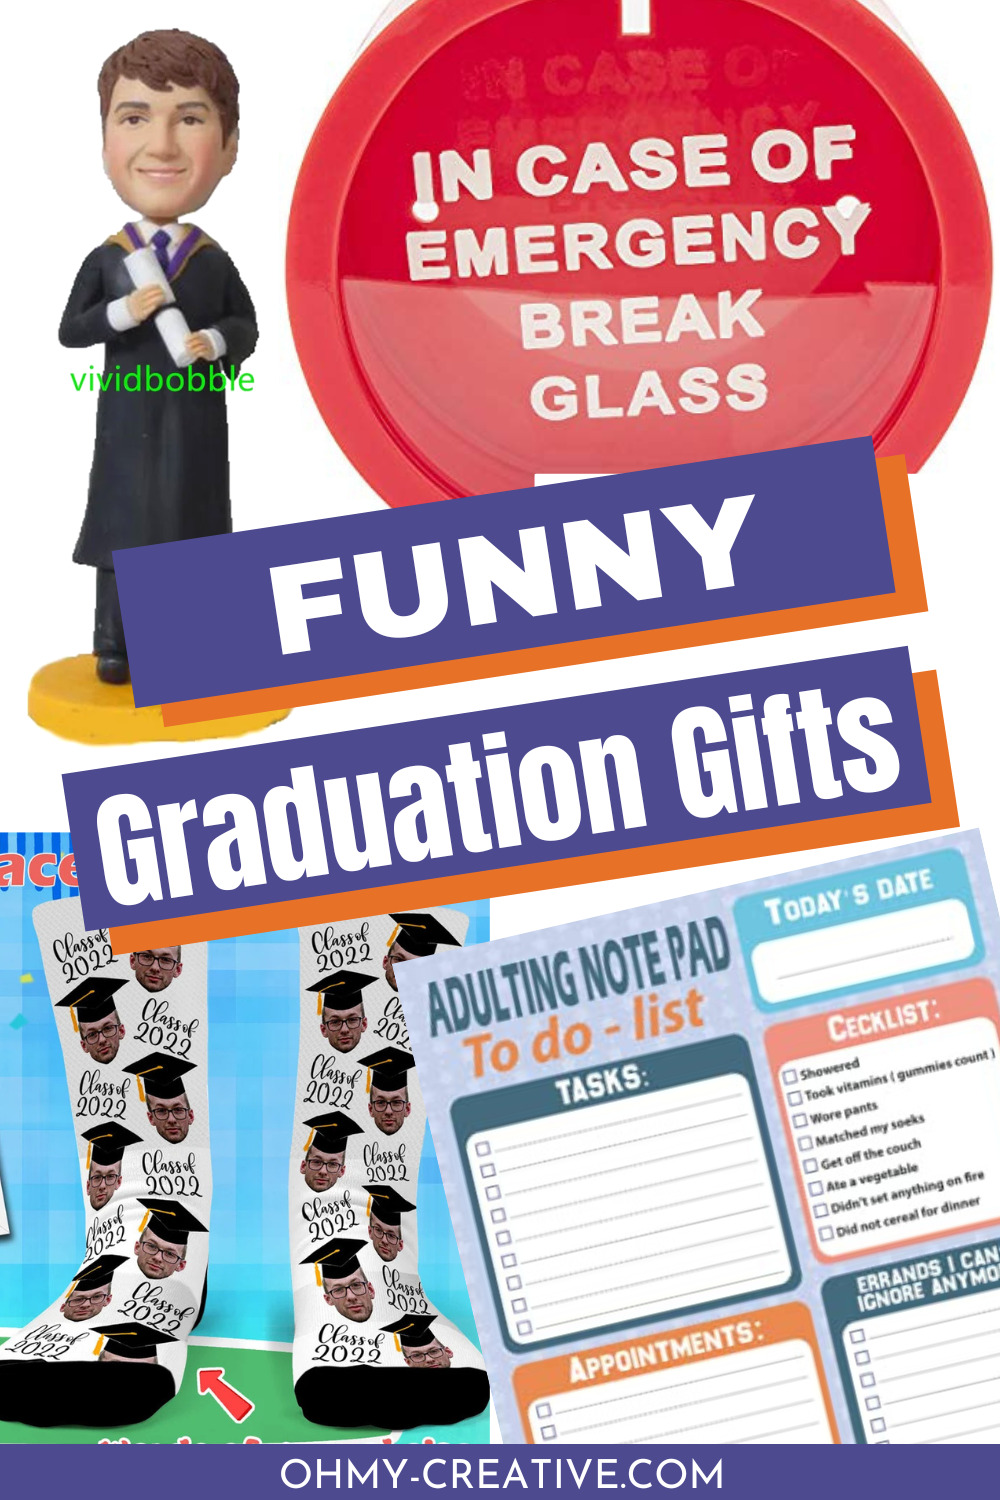 A collage of funny graduation gifts to give to the grad.